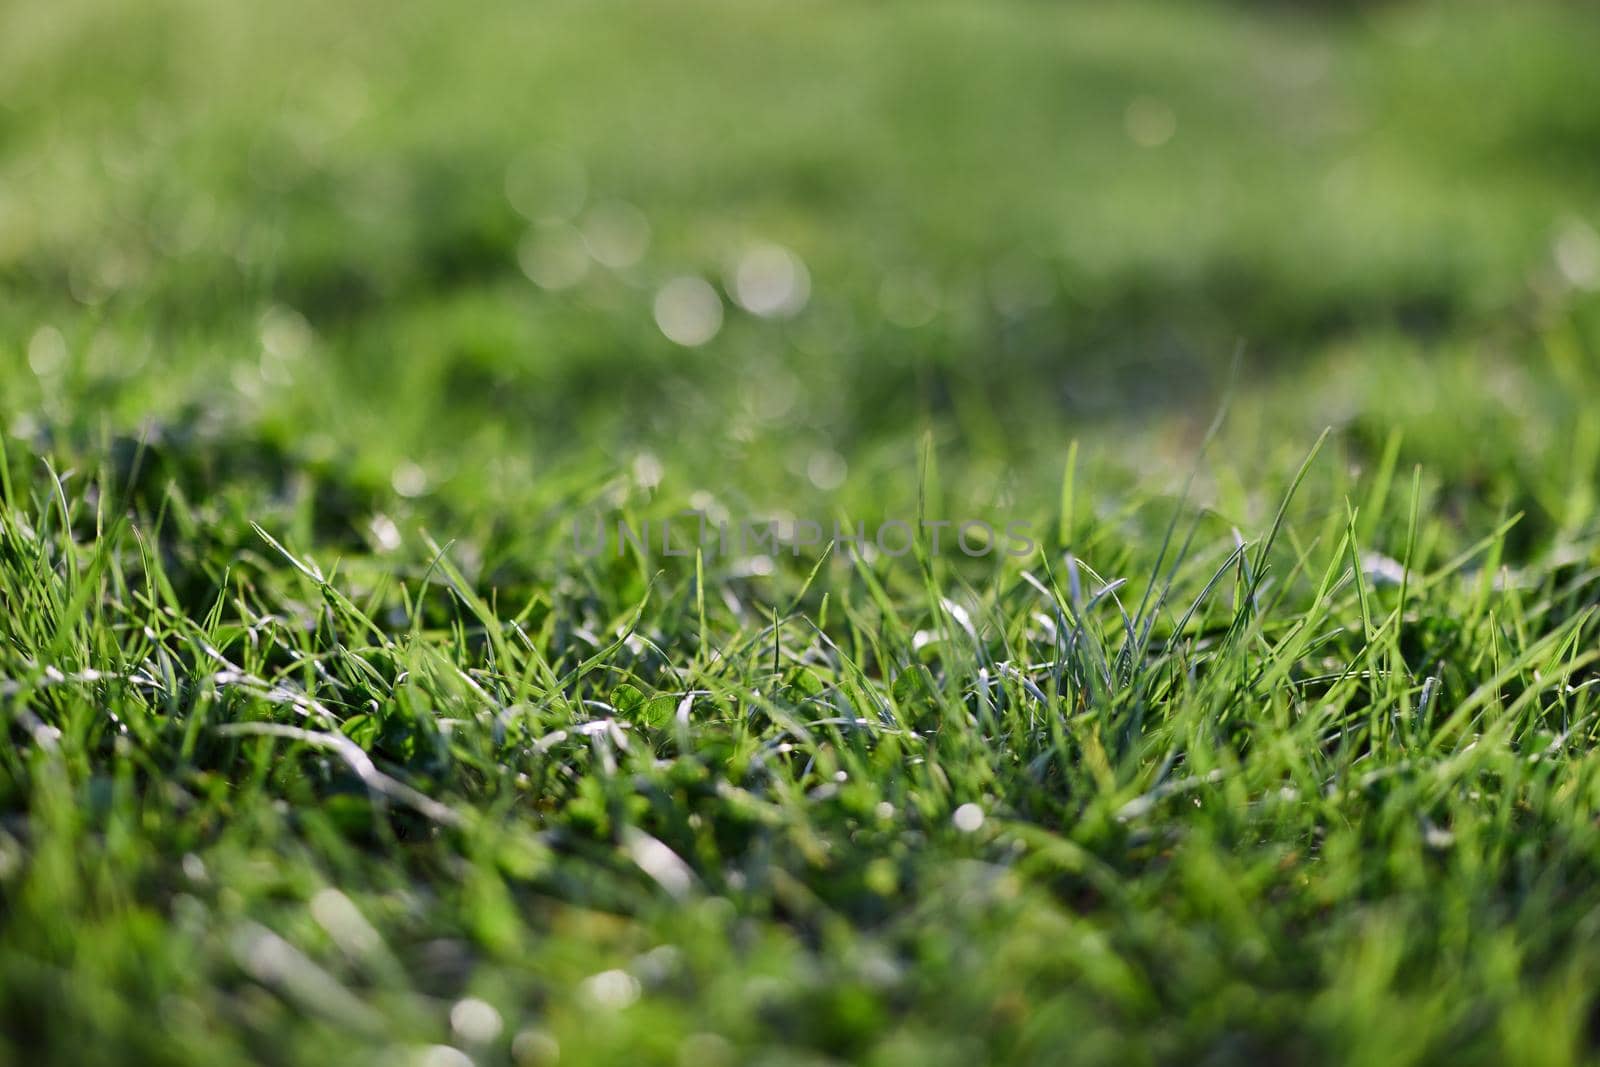 View of young green grass in the park, taken close-up with a beautiful blurring of the background. High quality photo